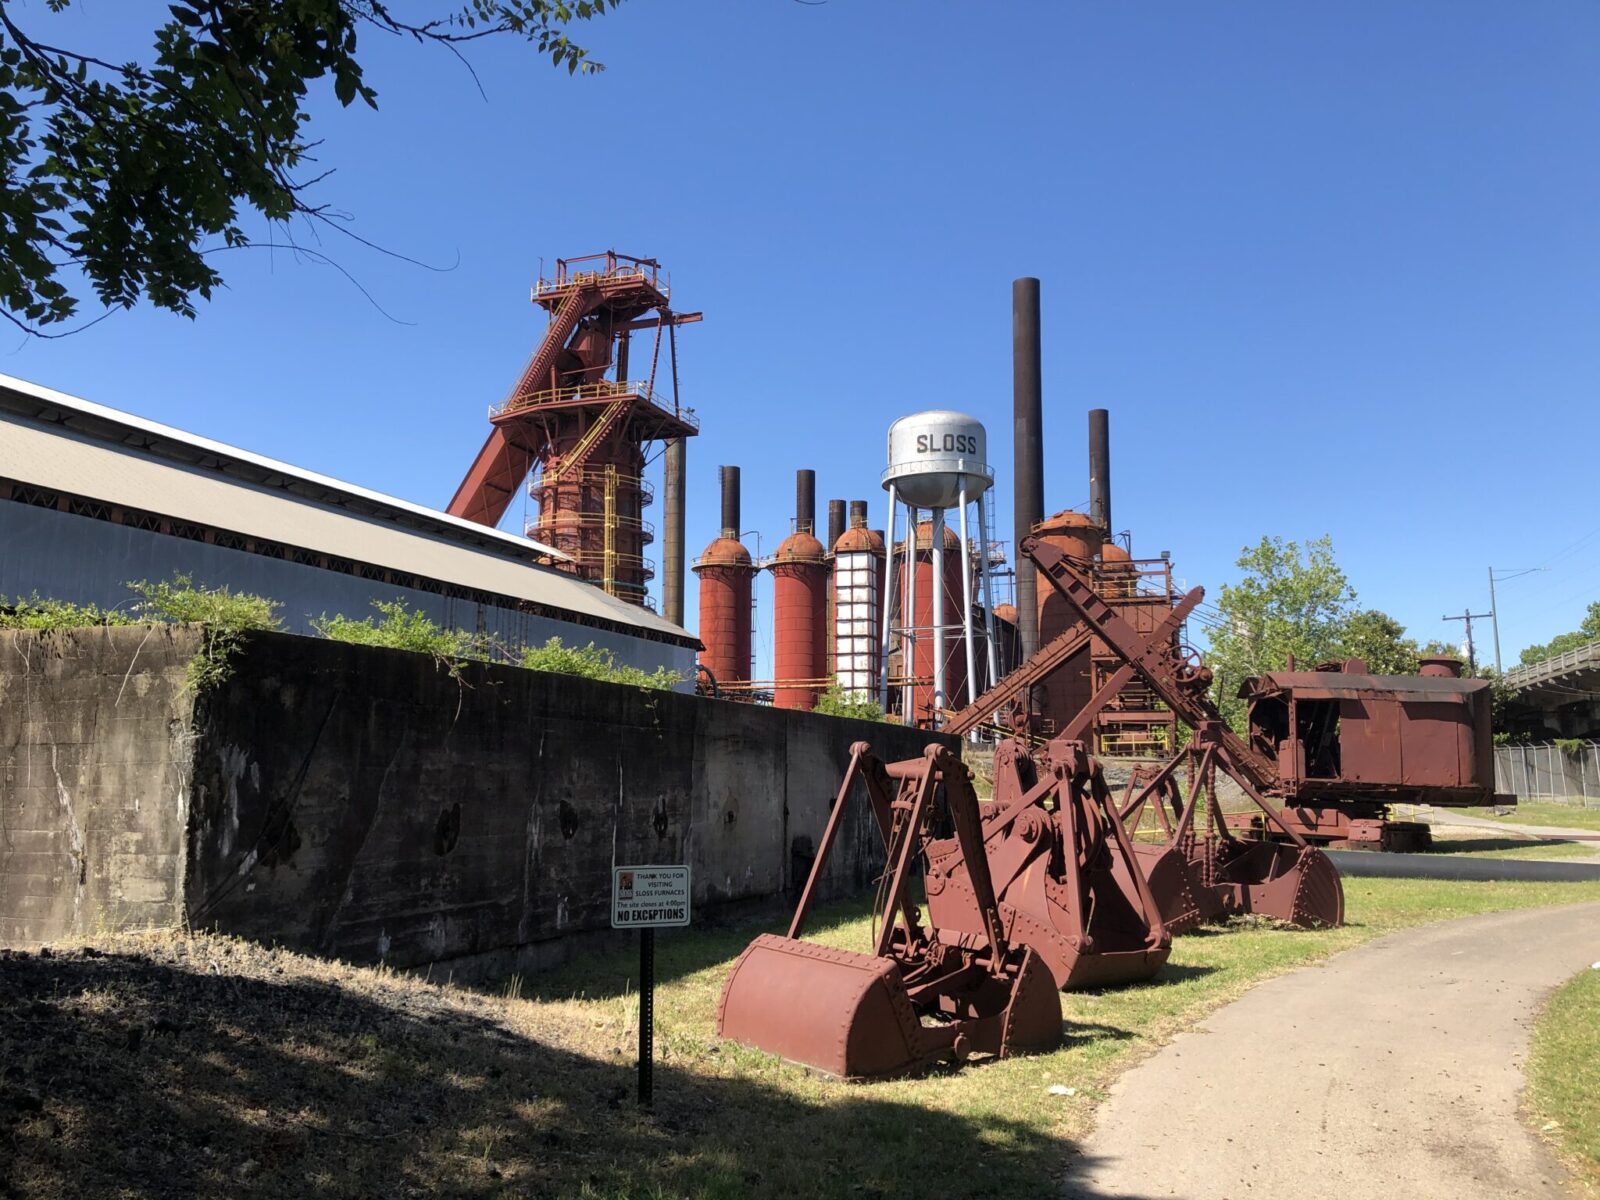 Refurbished for tourists, Sloss Furnaces in Birmingham, Ala. today preserves the history of this iron-producing region. (photograph courtesy of Sloss Furnaces)